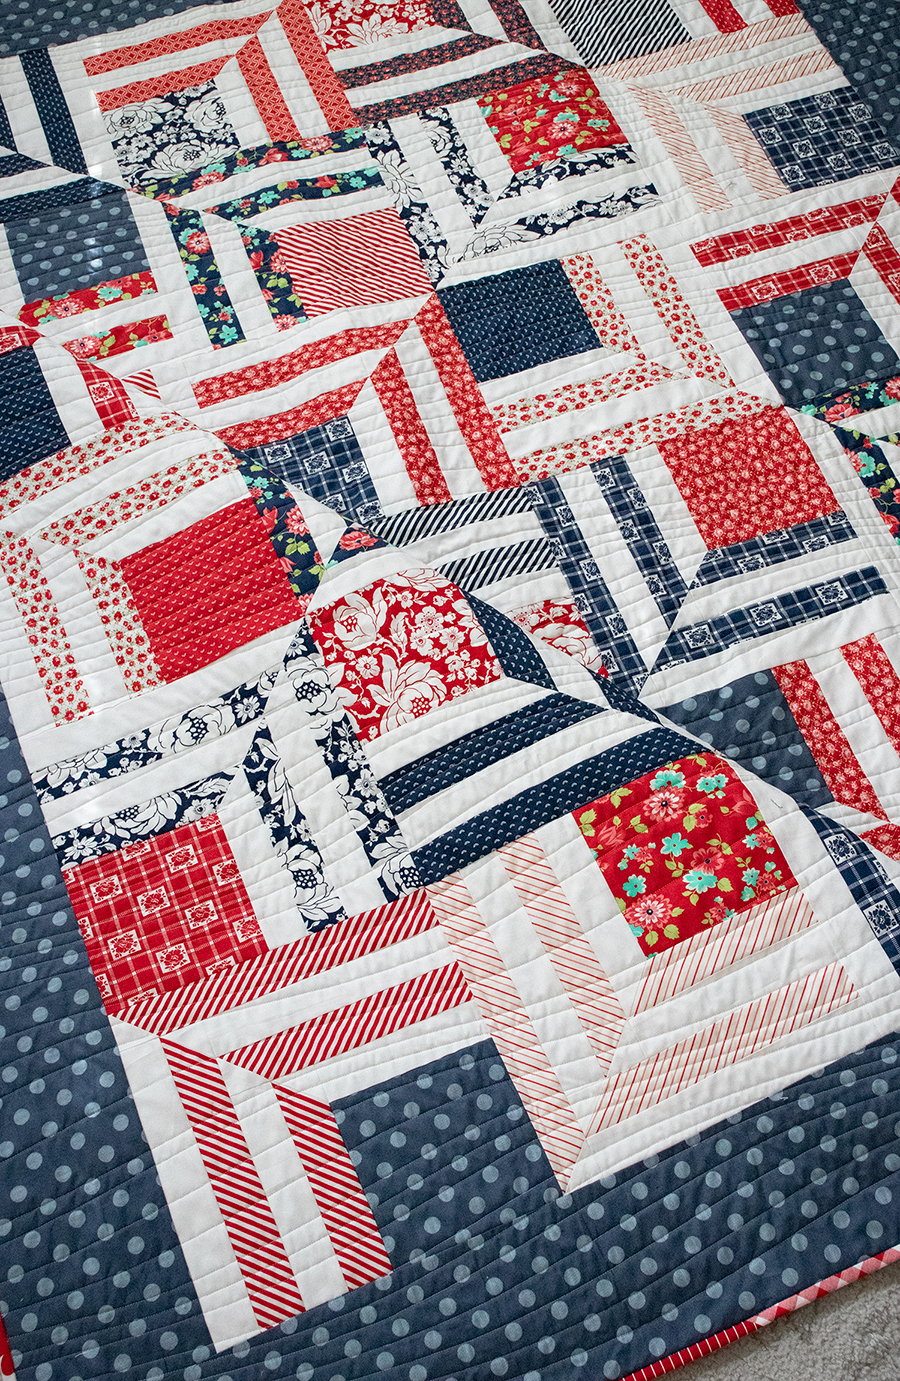 Fracture modern log cabin quilt by Lella Boutique. Cool patriotic quilt in Bonnie & Camille fabrics.